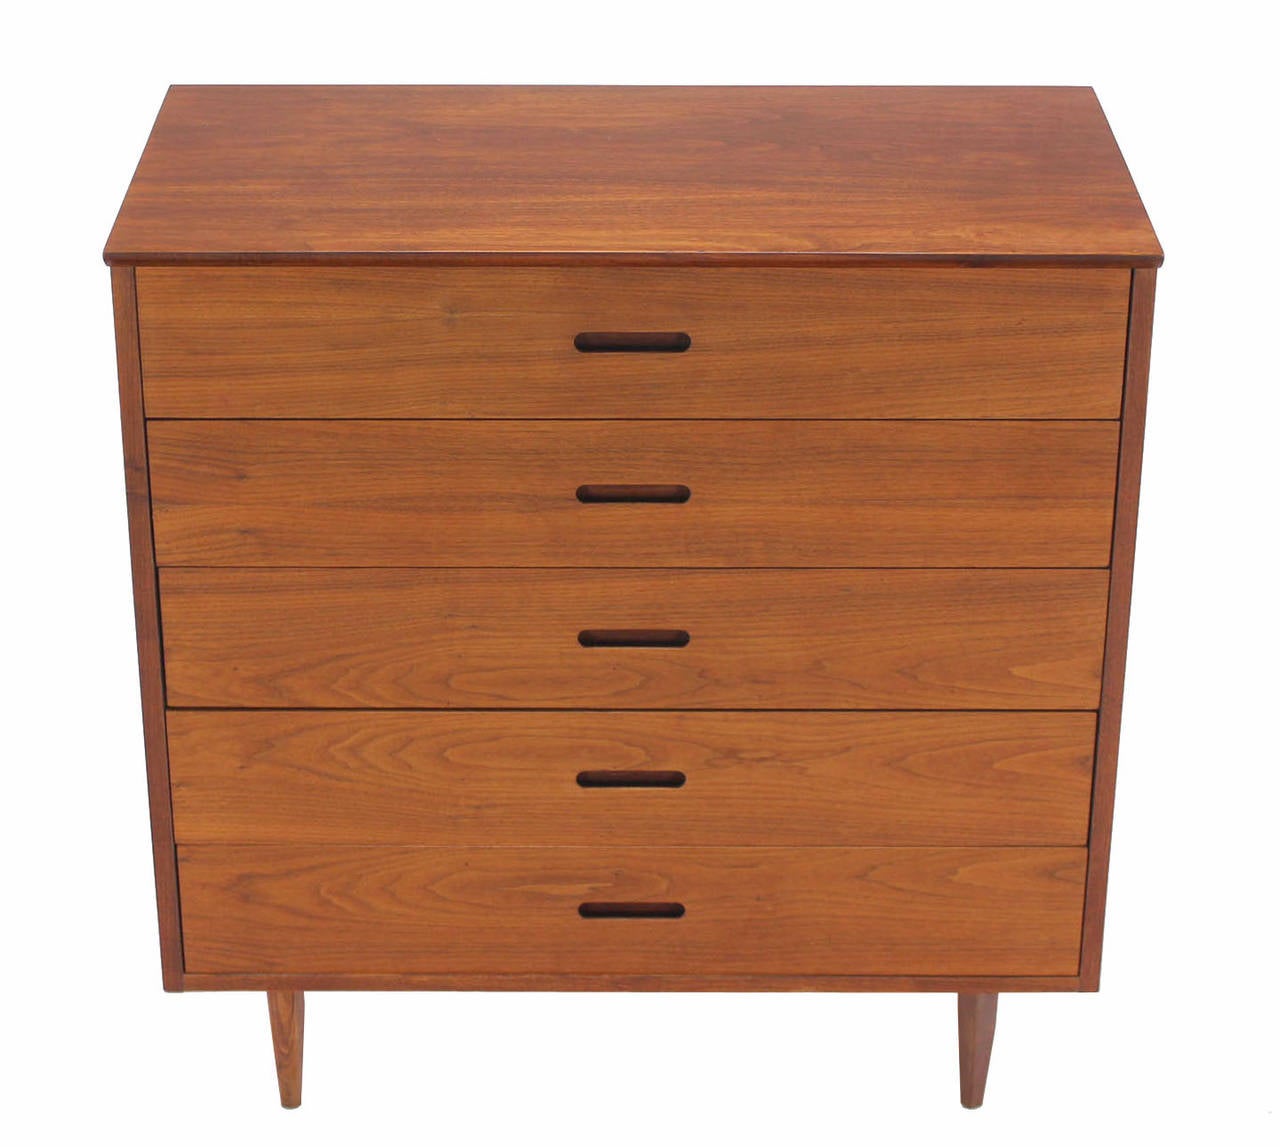 Very nice oiled walnut high chest dresser possibly designed by George Nelson.